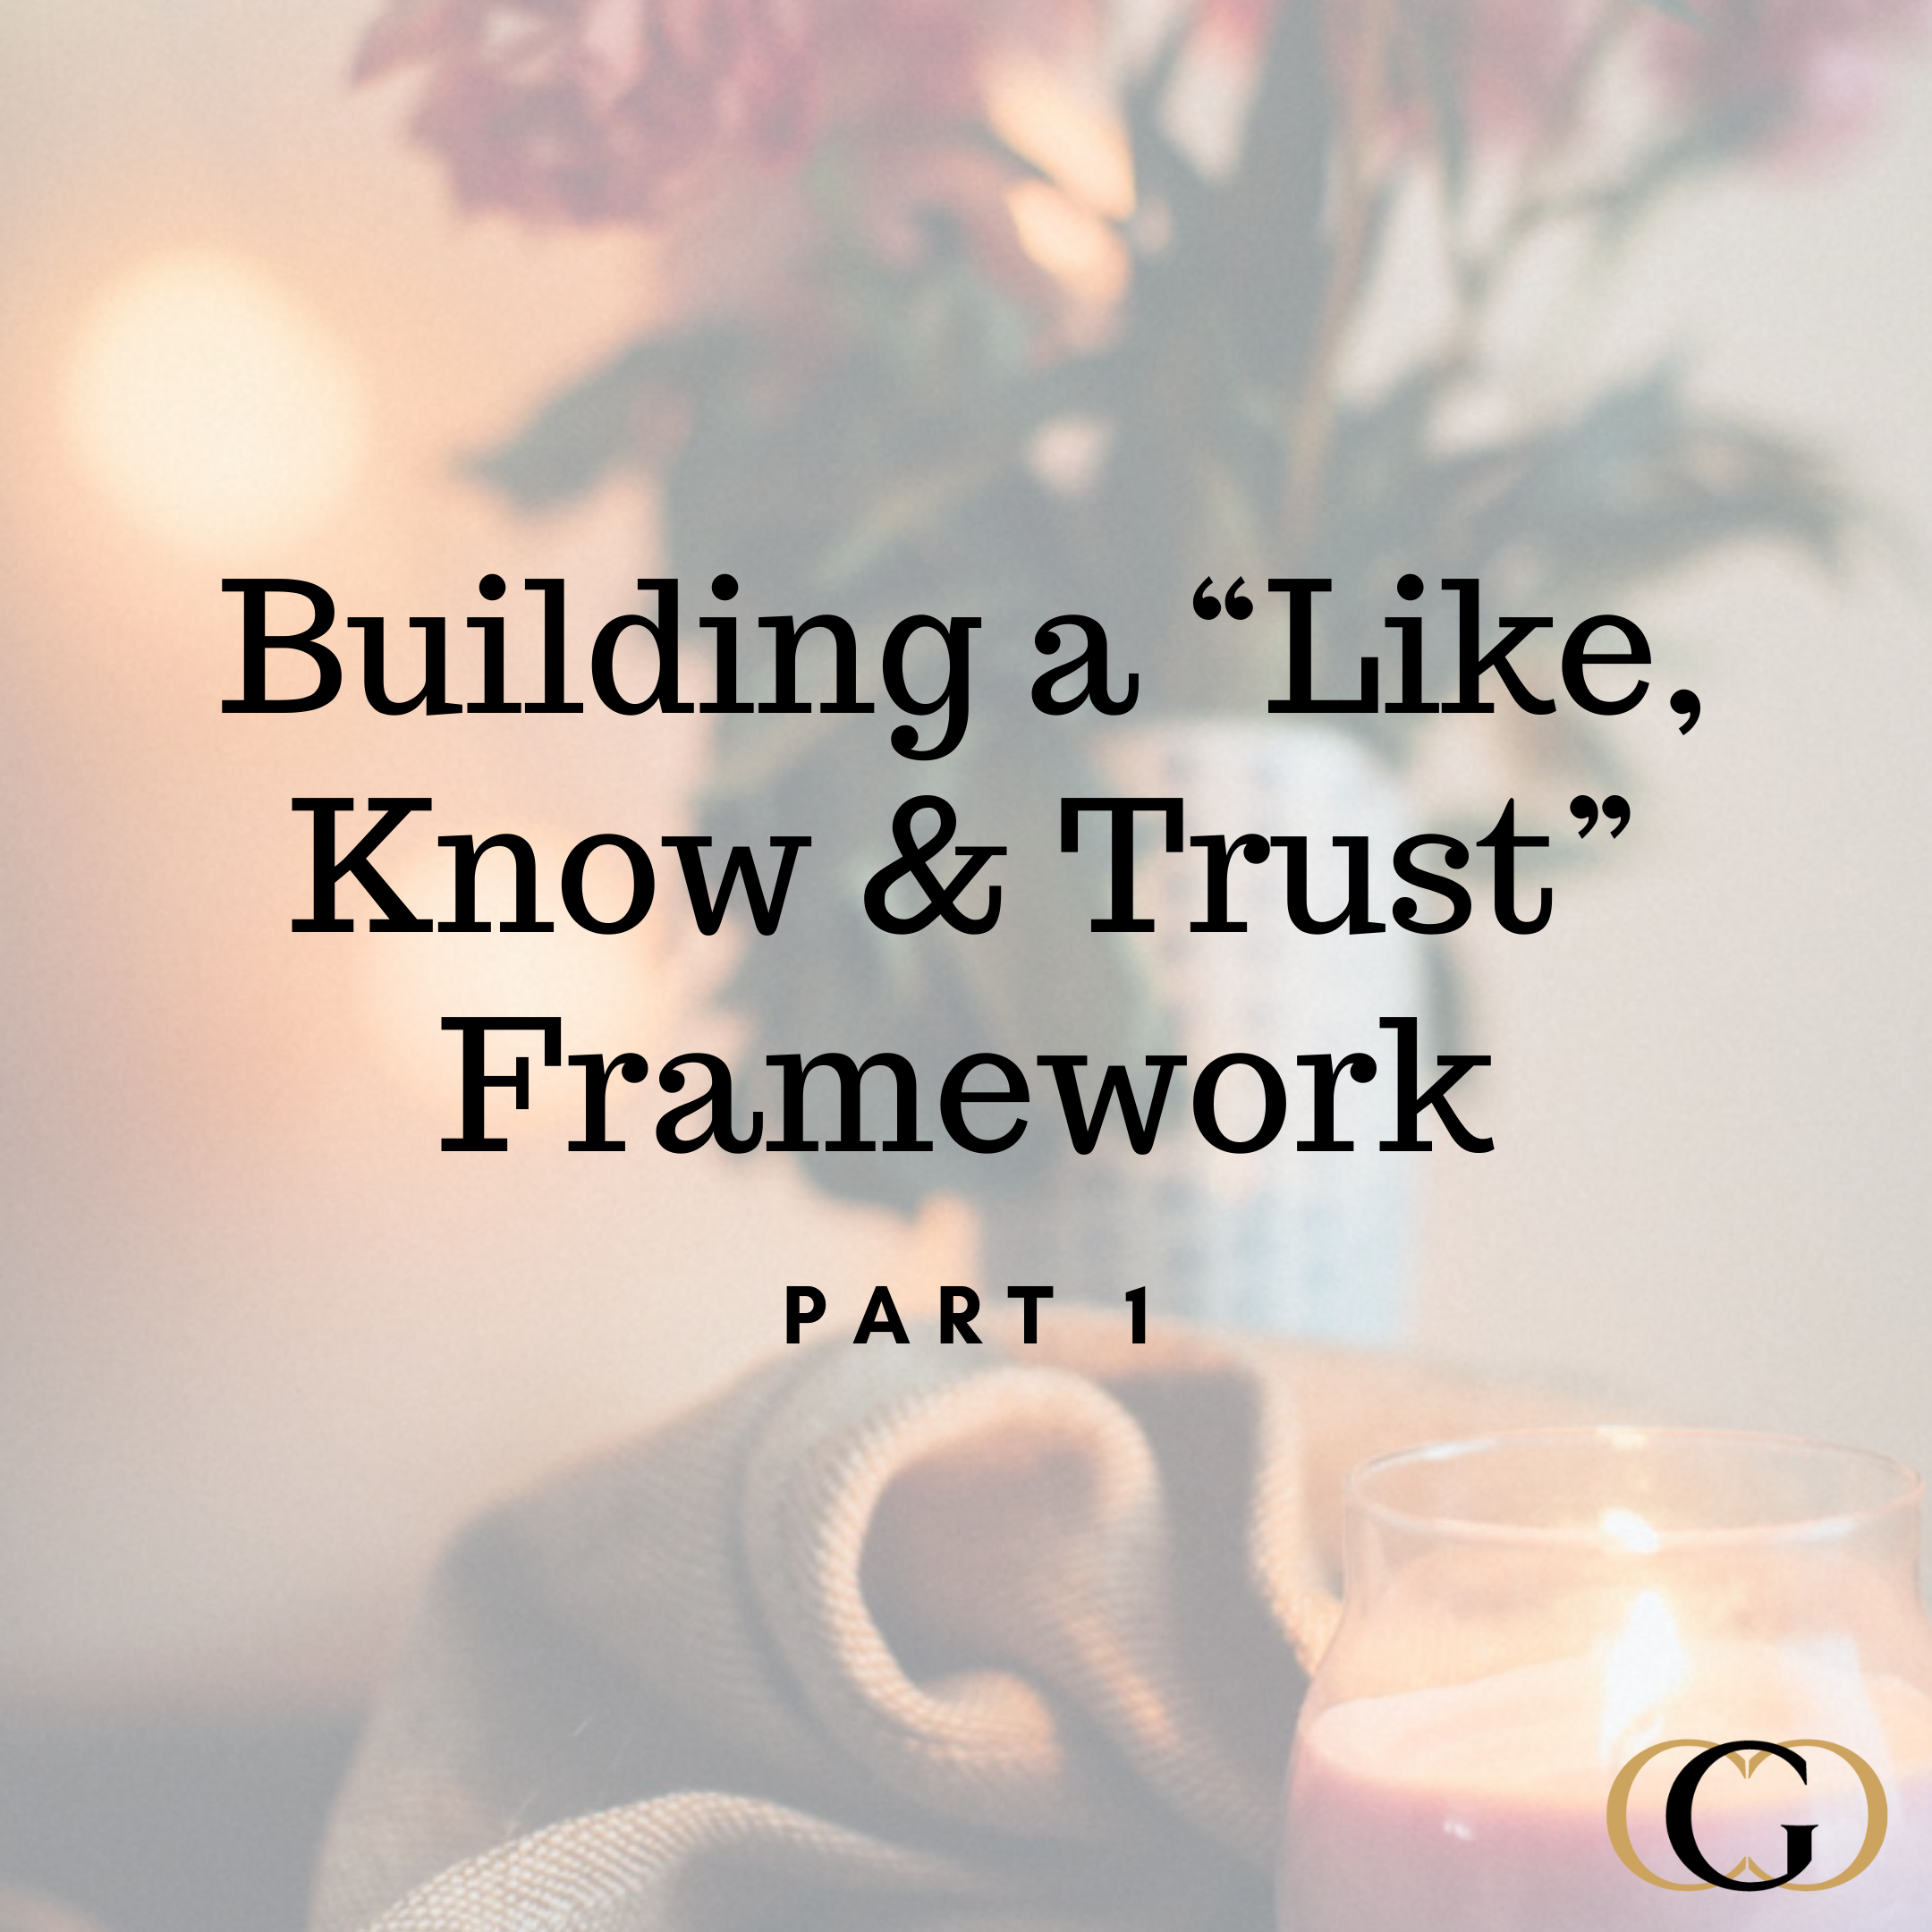 Building a “Like, Know & Trust” Framework Part 1